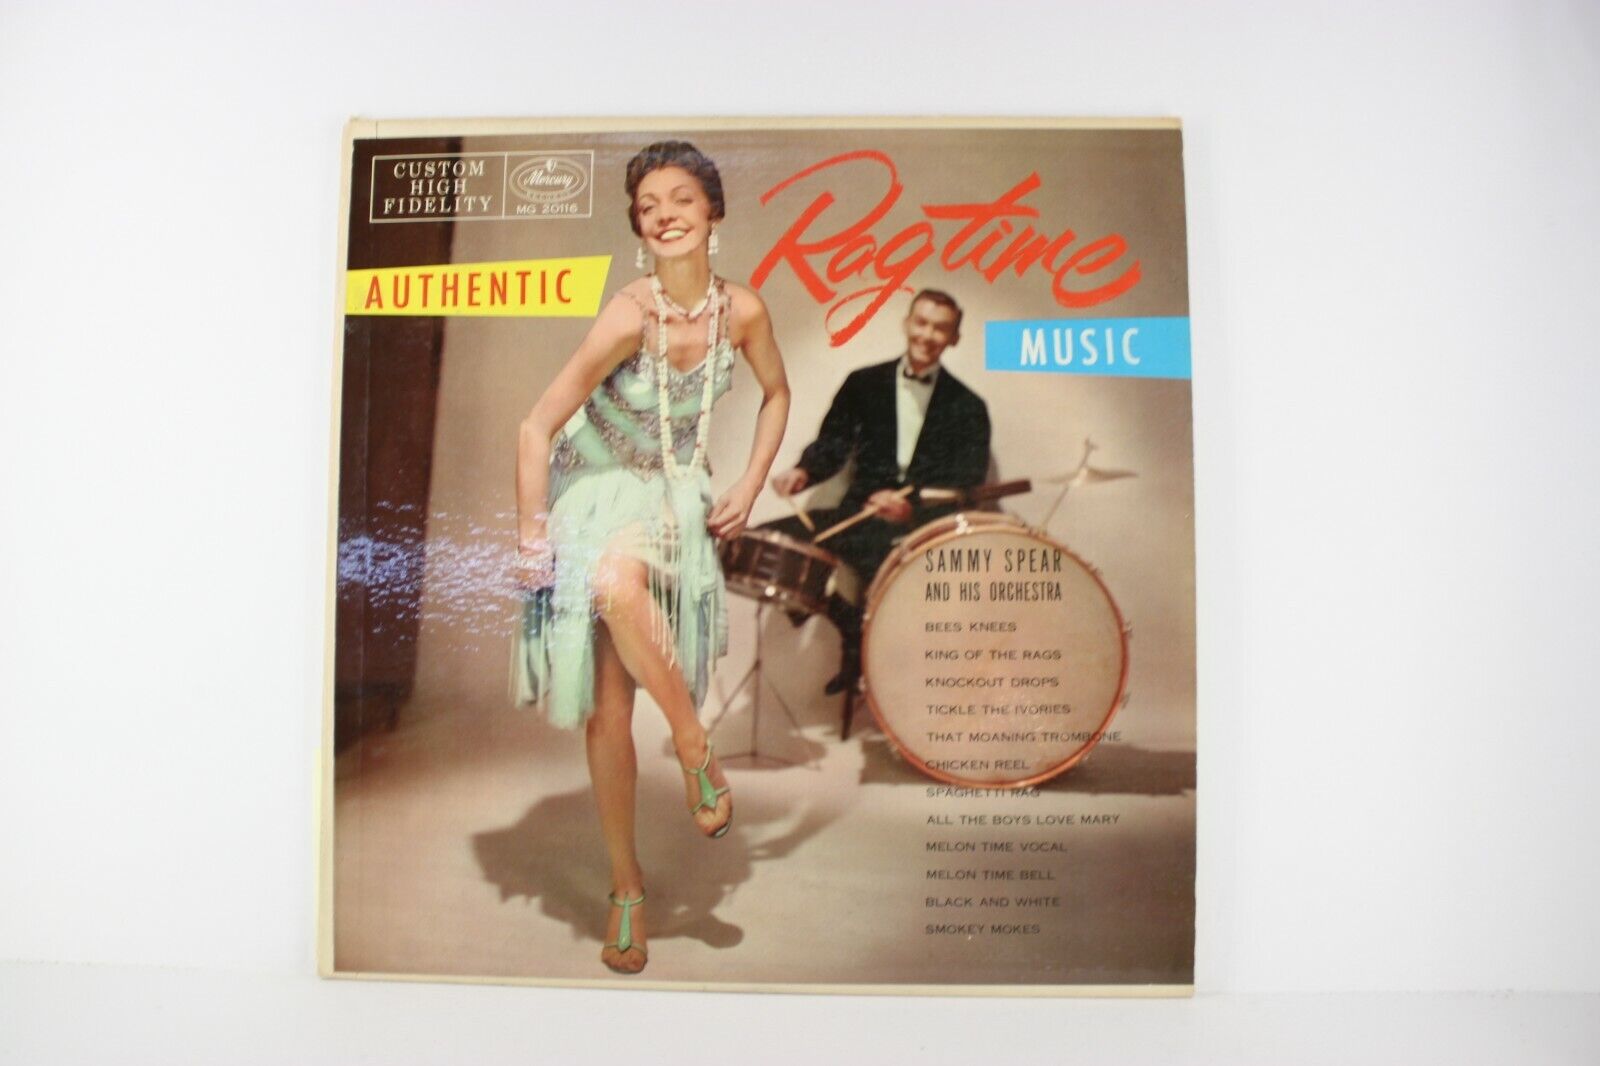 Authentic Ragtime Music Sammy Spear & his Orchestra Vintage Vinyl LP Record 